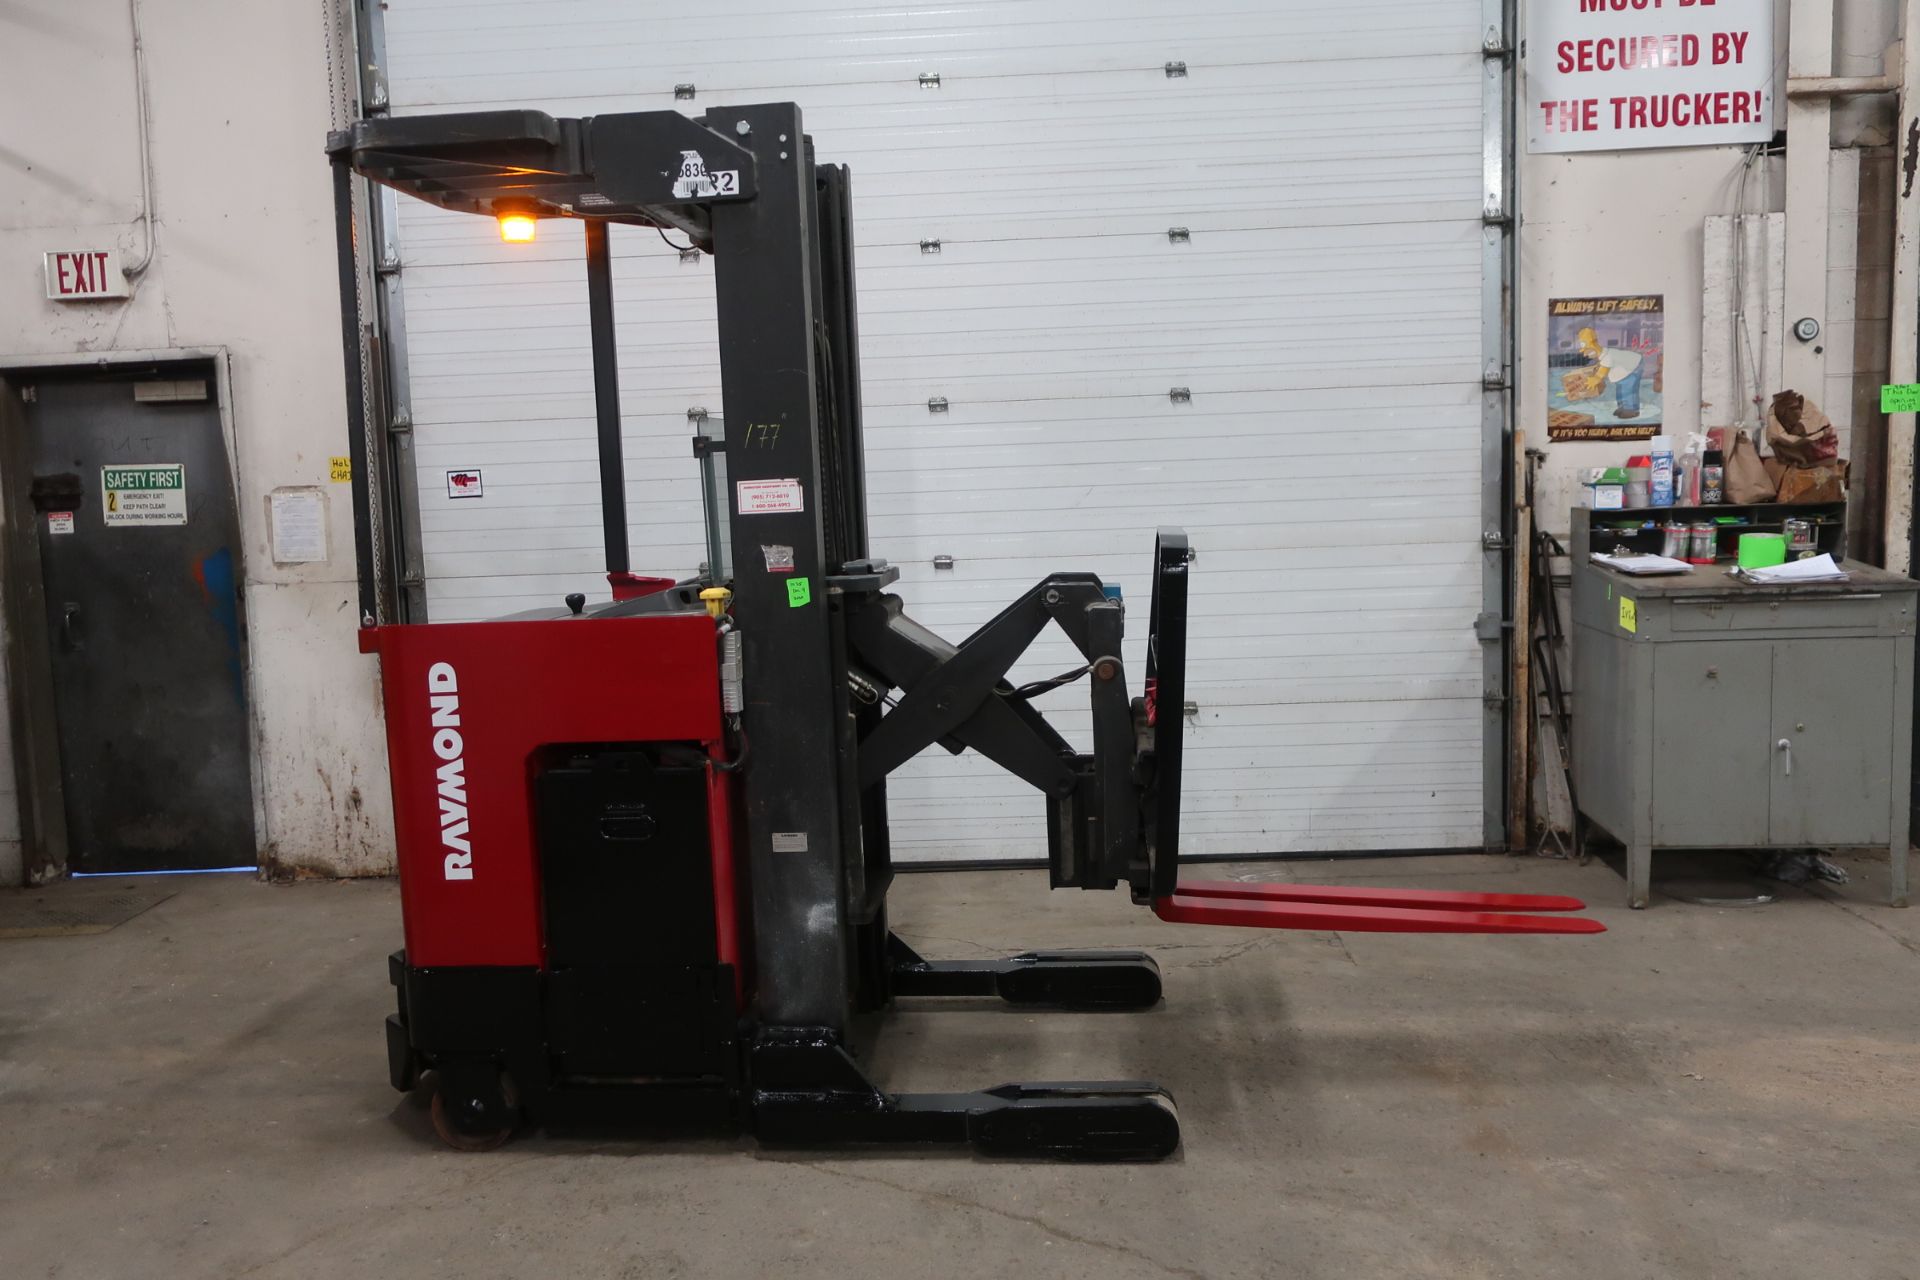 FREE CUSTOMS - 2012 Raymond Reach Truck Pallet Lifter 5000lbs capacity REACH TRUCK electric with